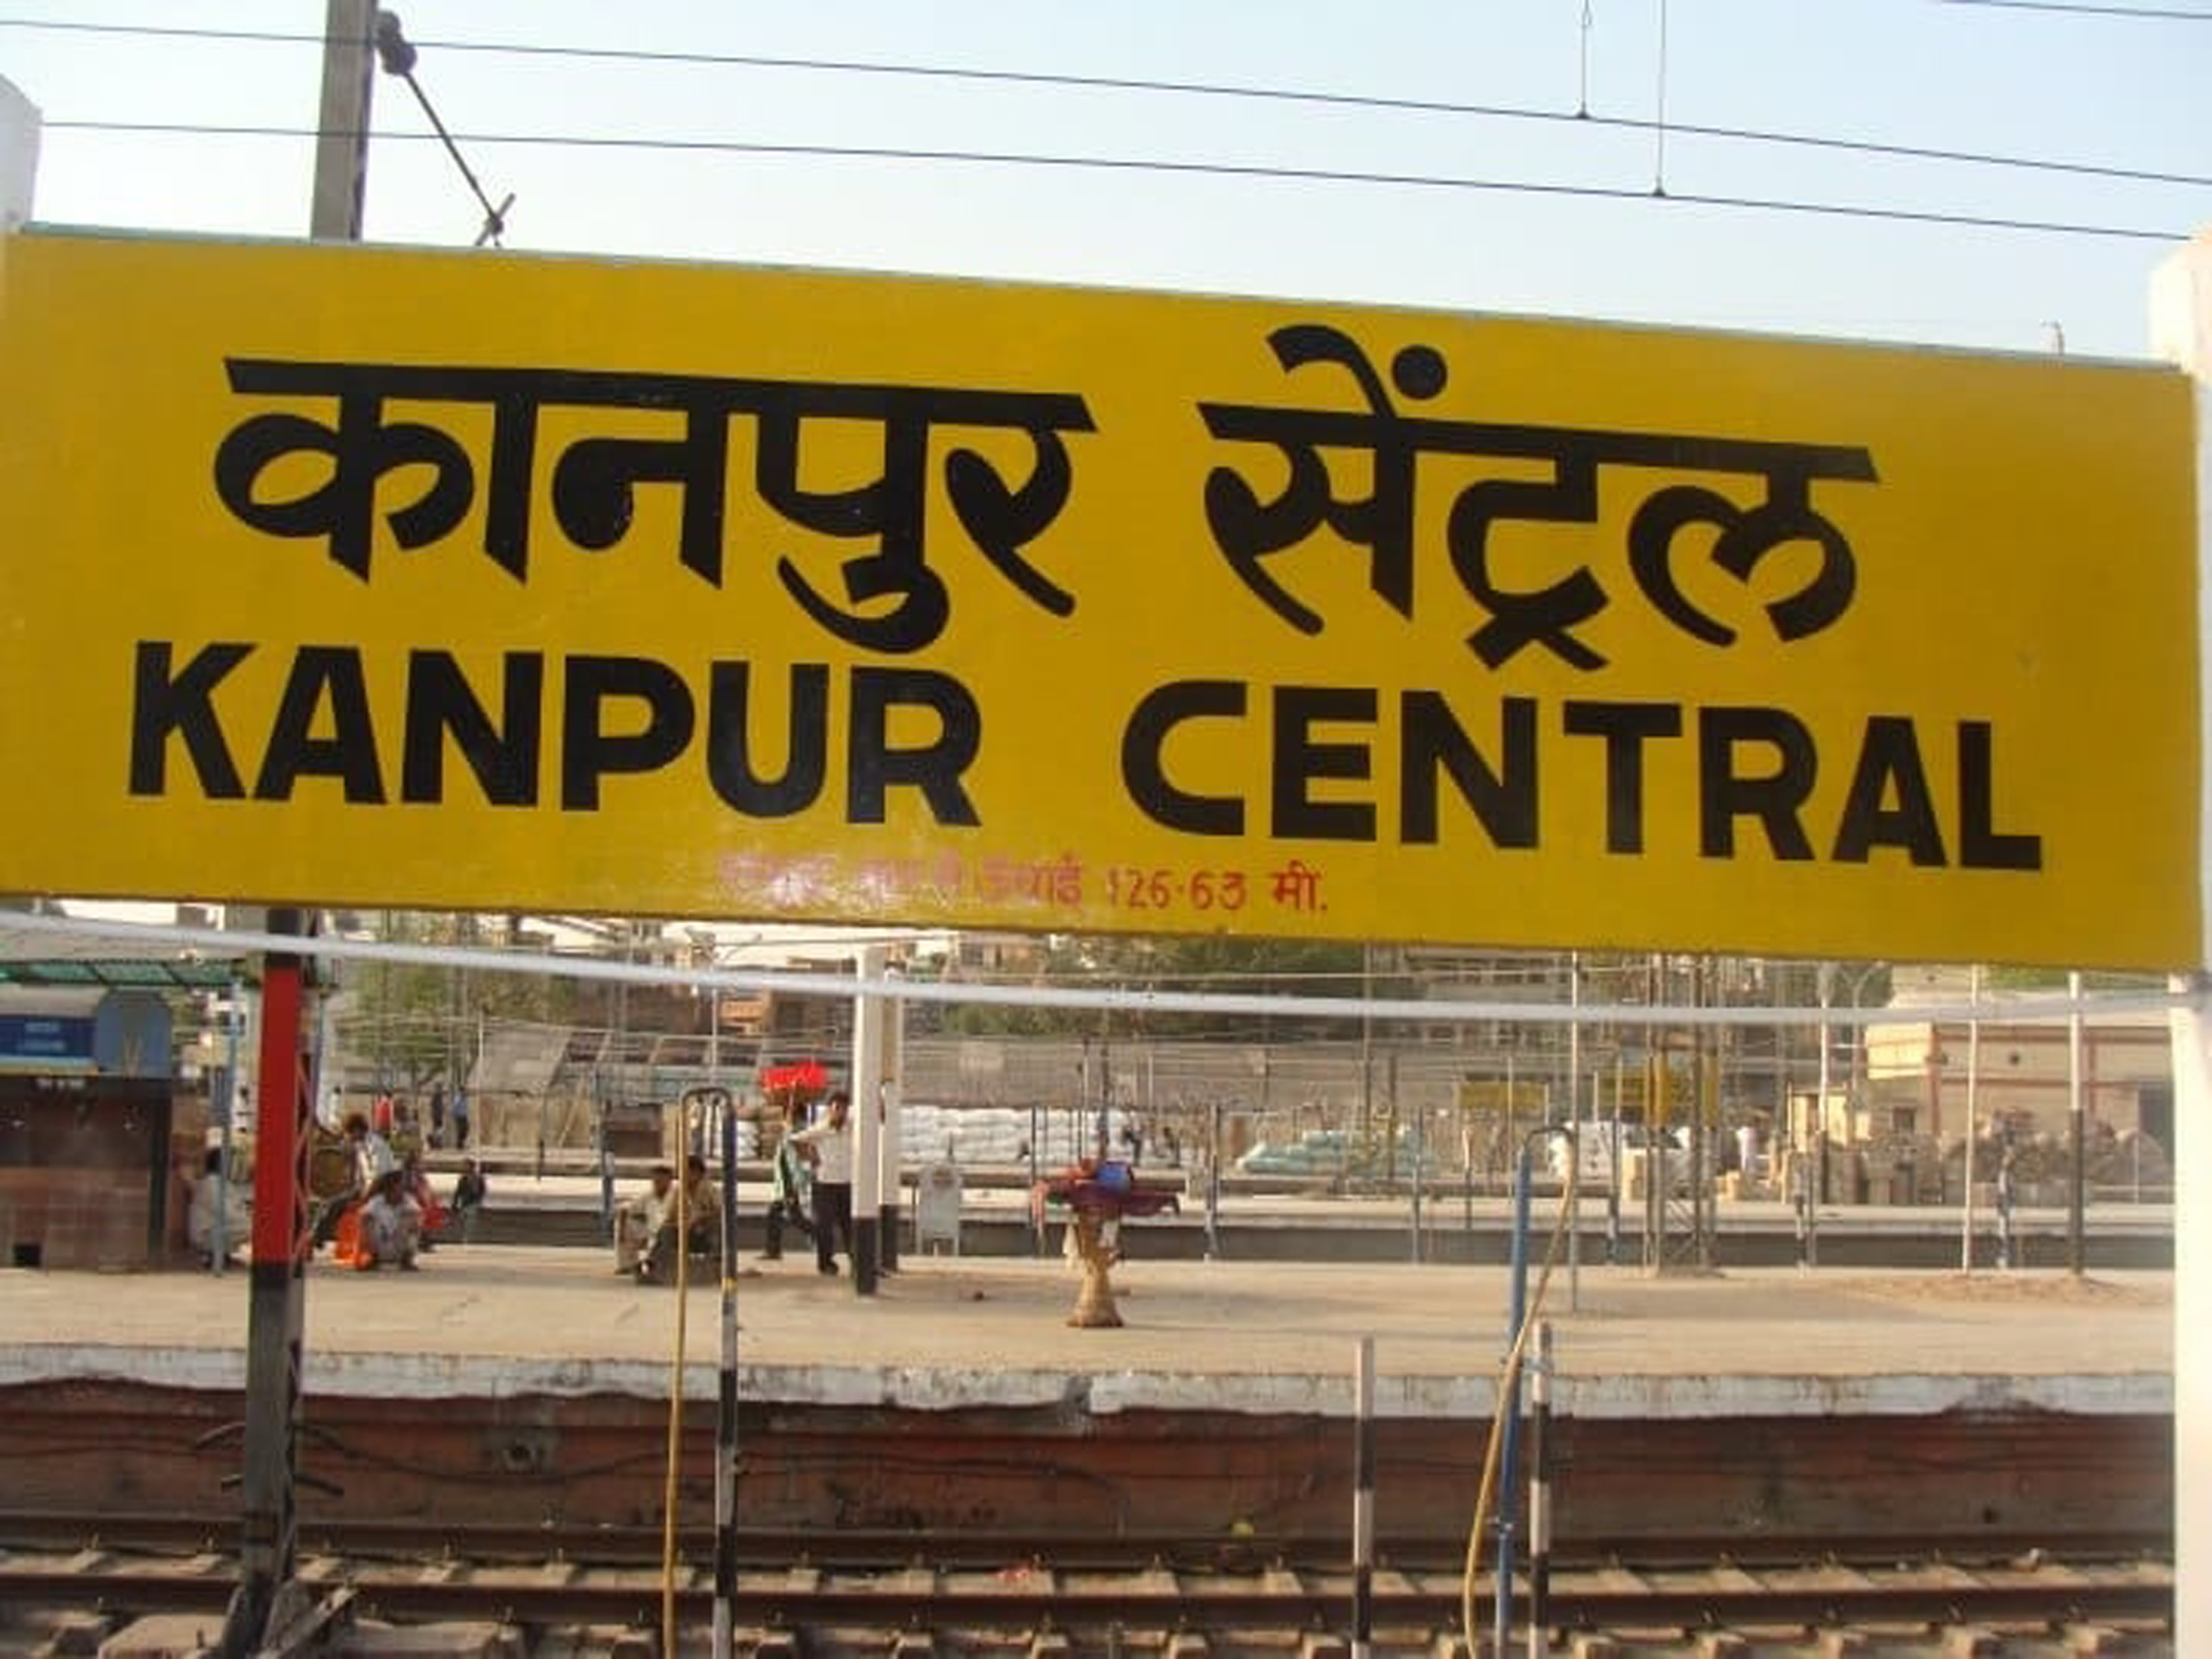 Kanpur Central Railway Station, Operations, Private Company